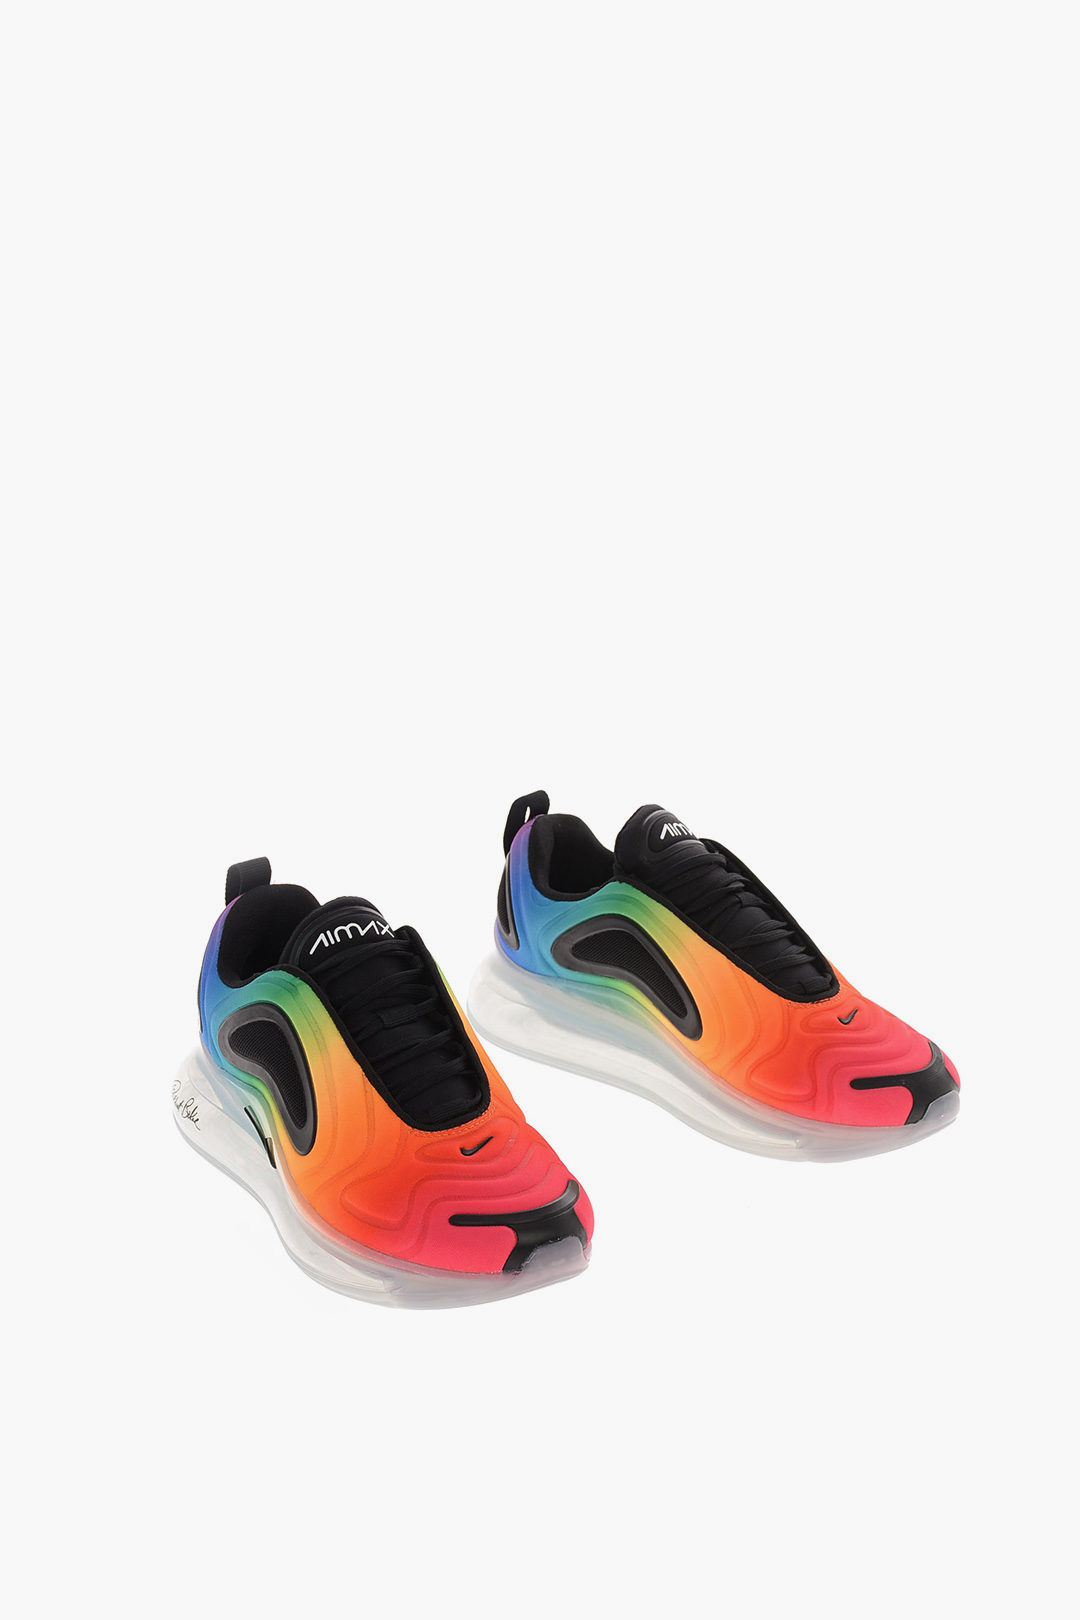 Nike GILBERT BAKER Fabric AIR MAX BETRUE Sneakers with Air Bubble Sole women Glamood Outlet